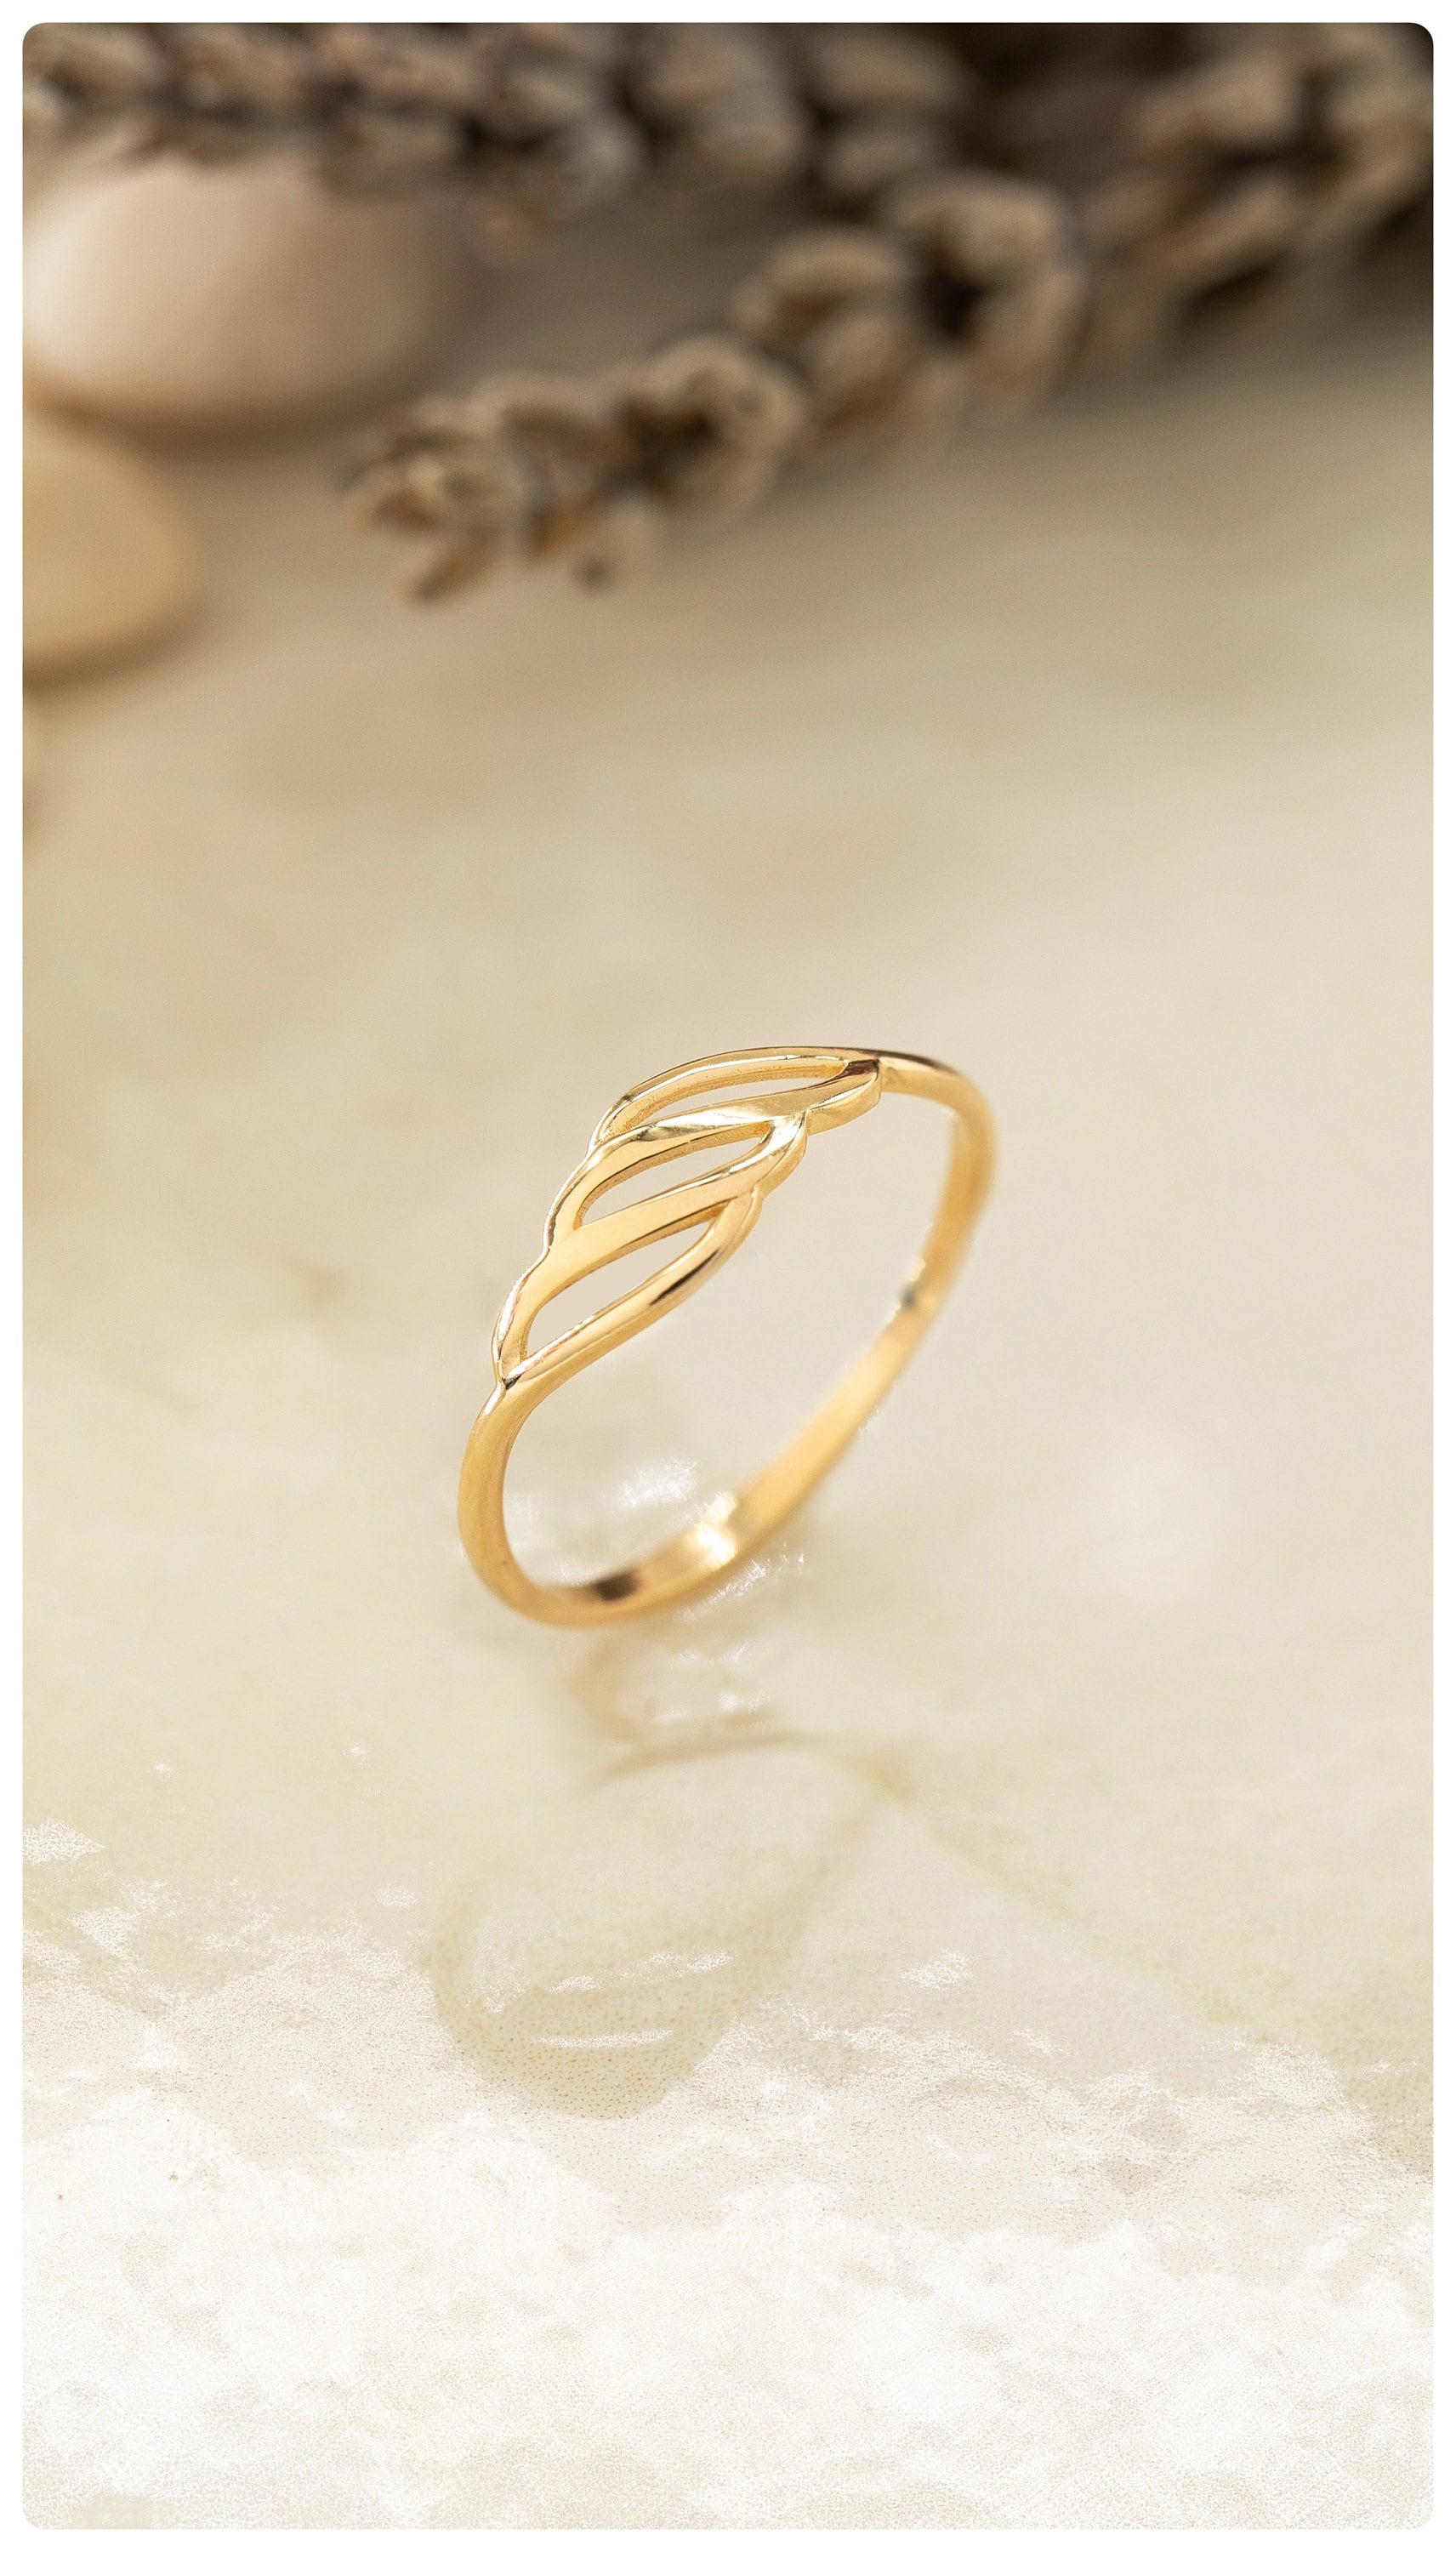 14K Gold Wedding Band Ring with 925 Sterling Silver Women's Love Ring Gift for Anniversary and Engagement Dainty and Delicate Wedding Gift